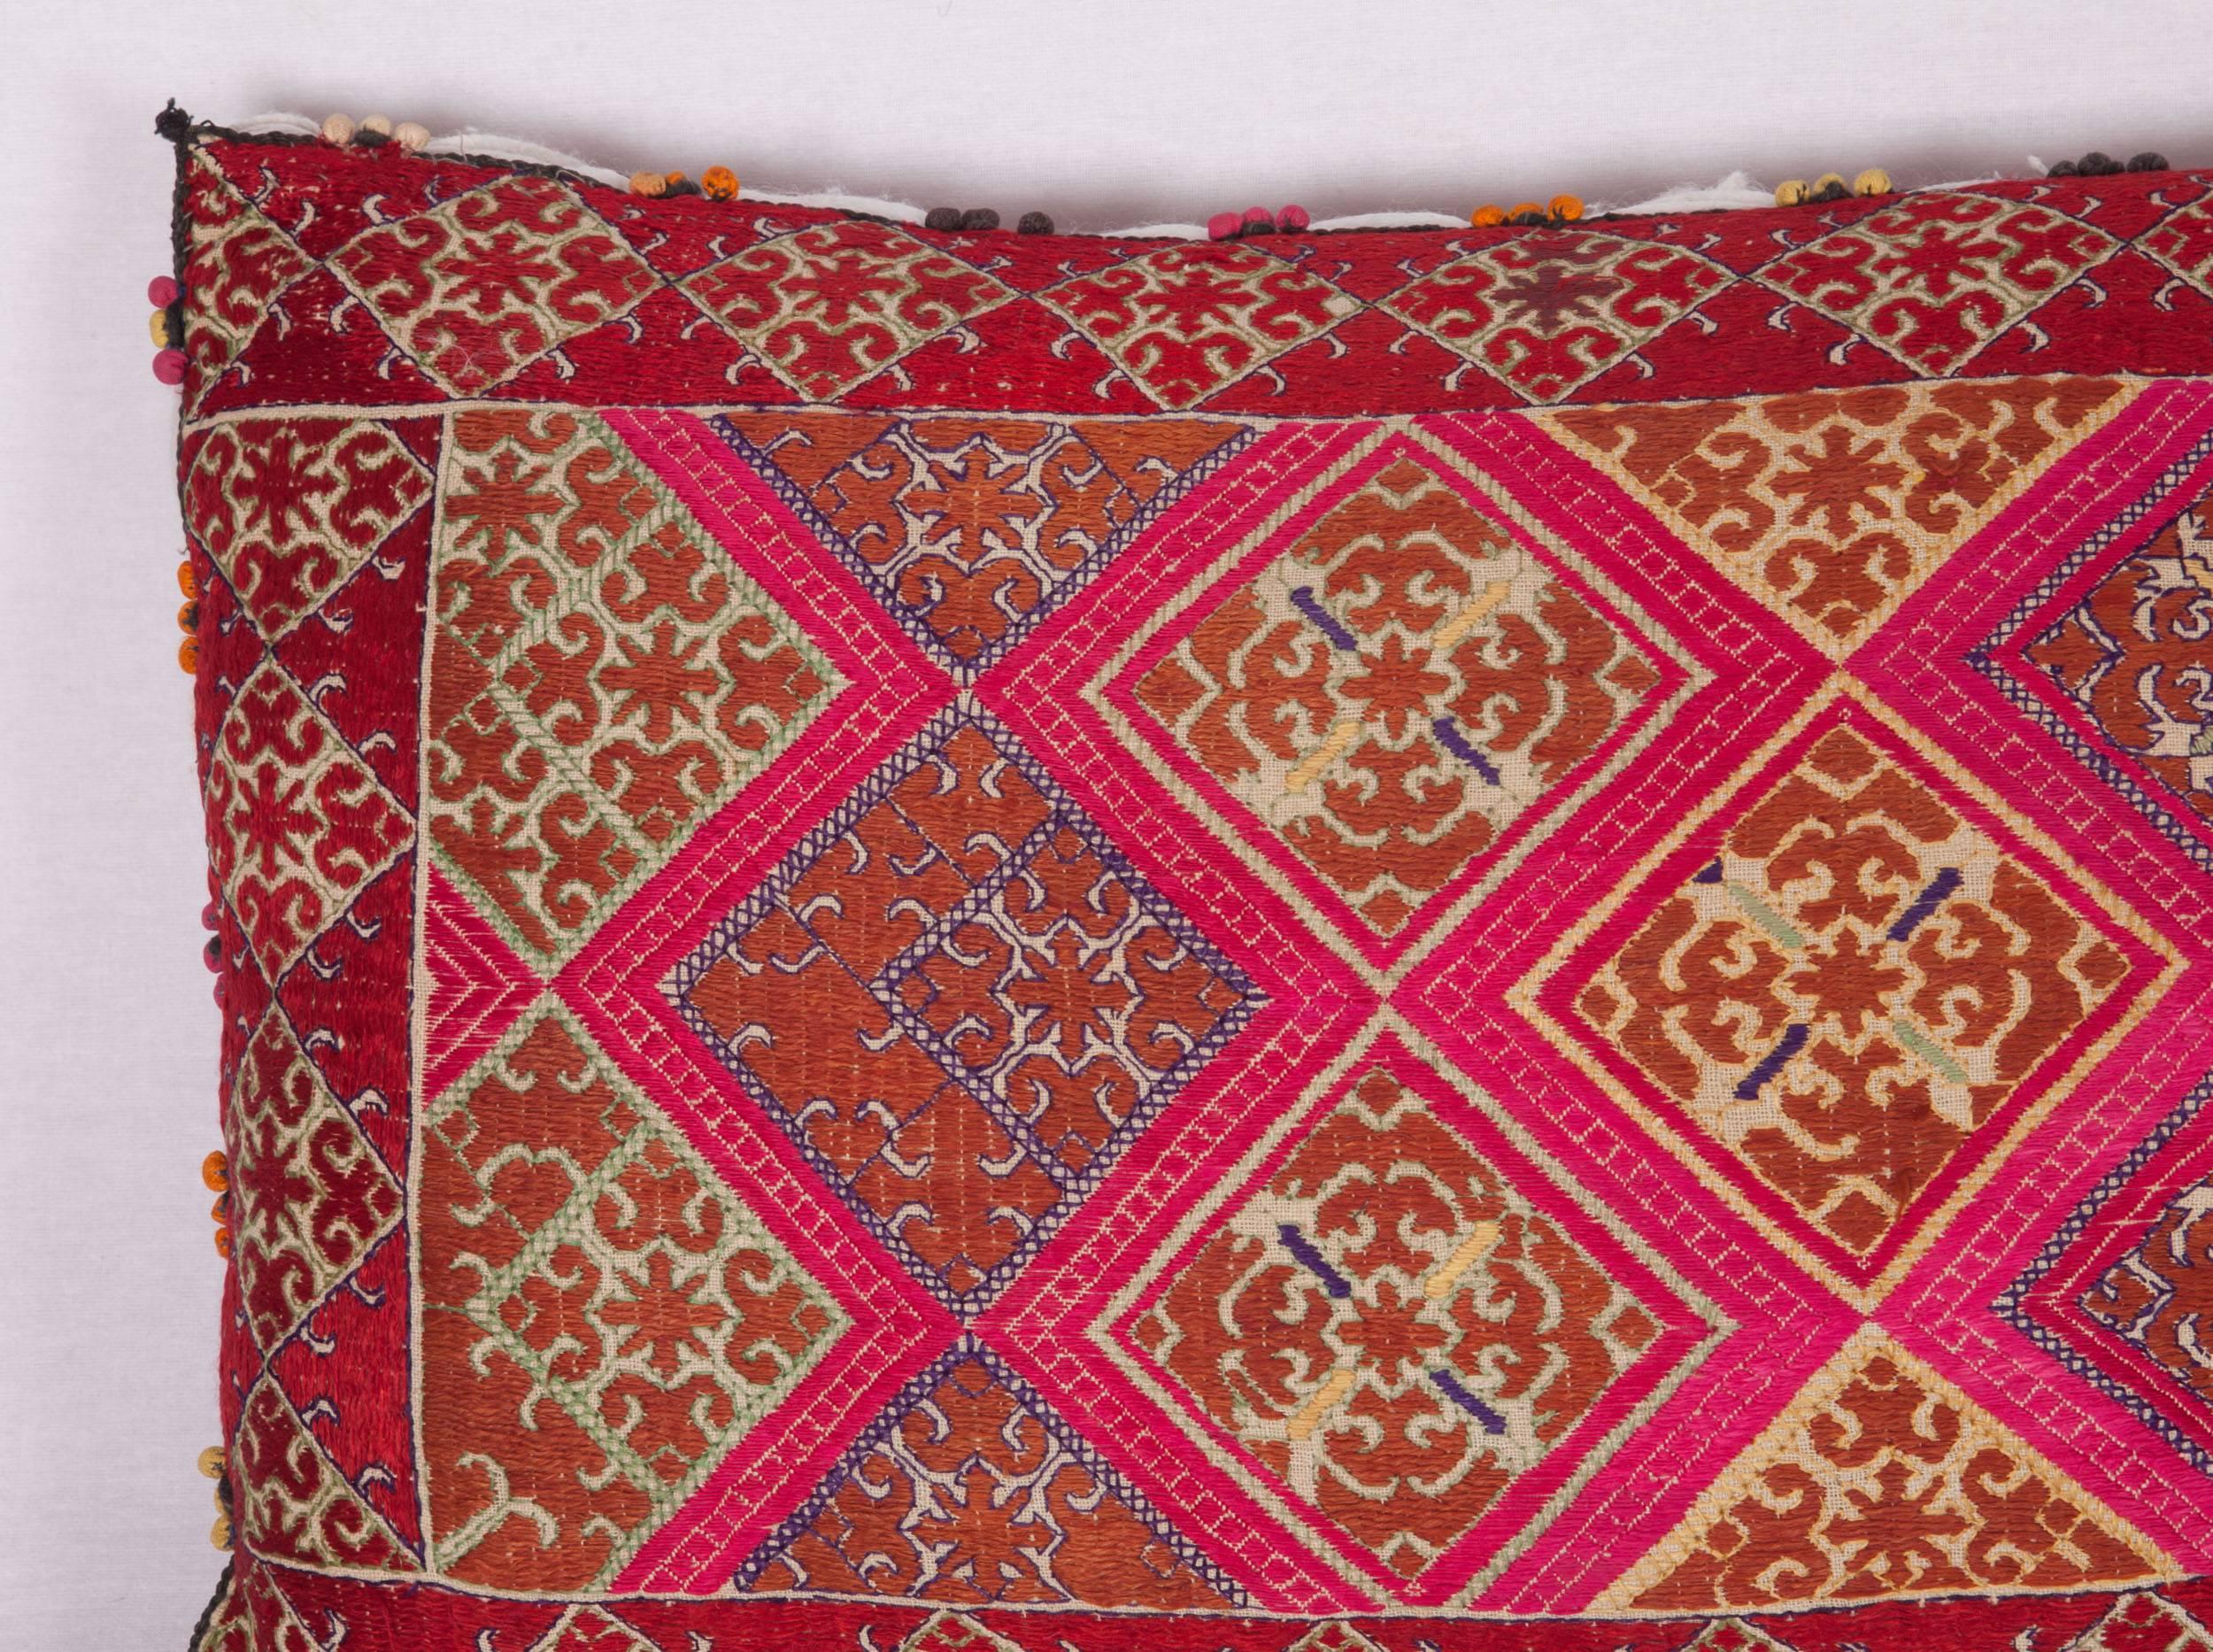 Suzani Pillow Made Out of a 1930s Swat Embroidery